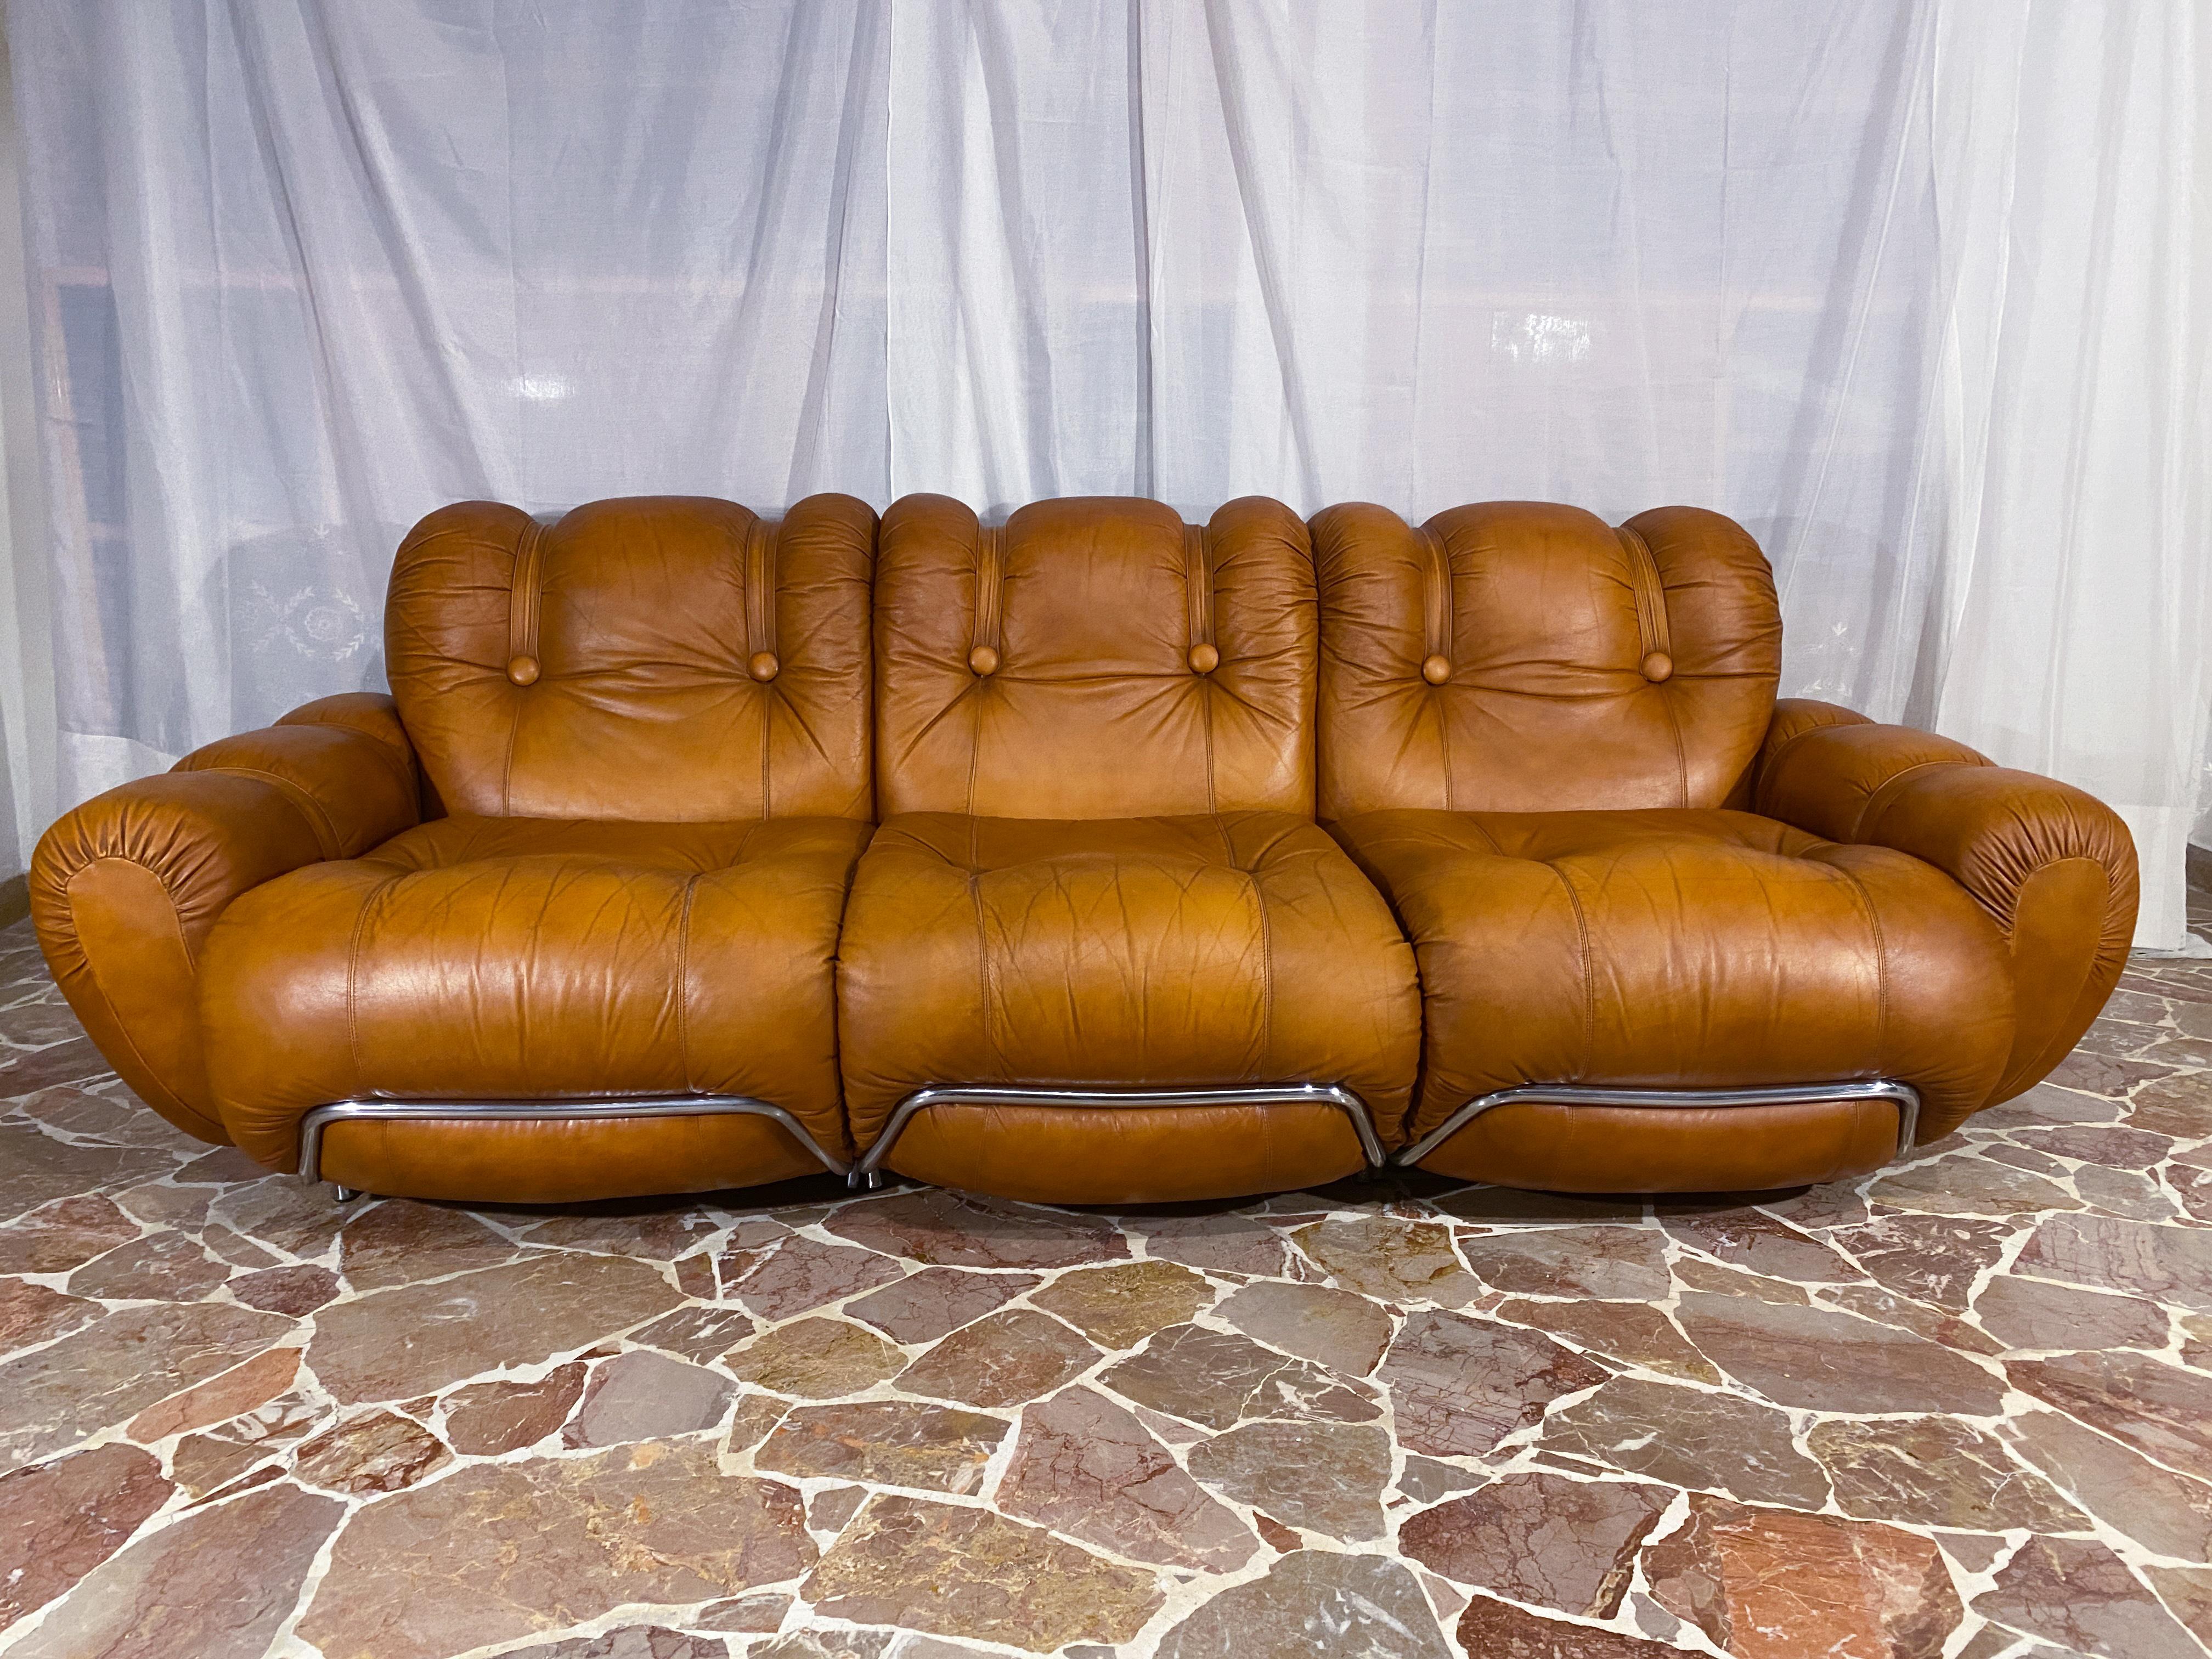 Italian Mid-Century Space Age Living Room Set in Natural Leather, 1970 For Sale 8